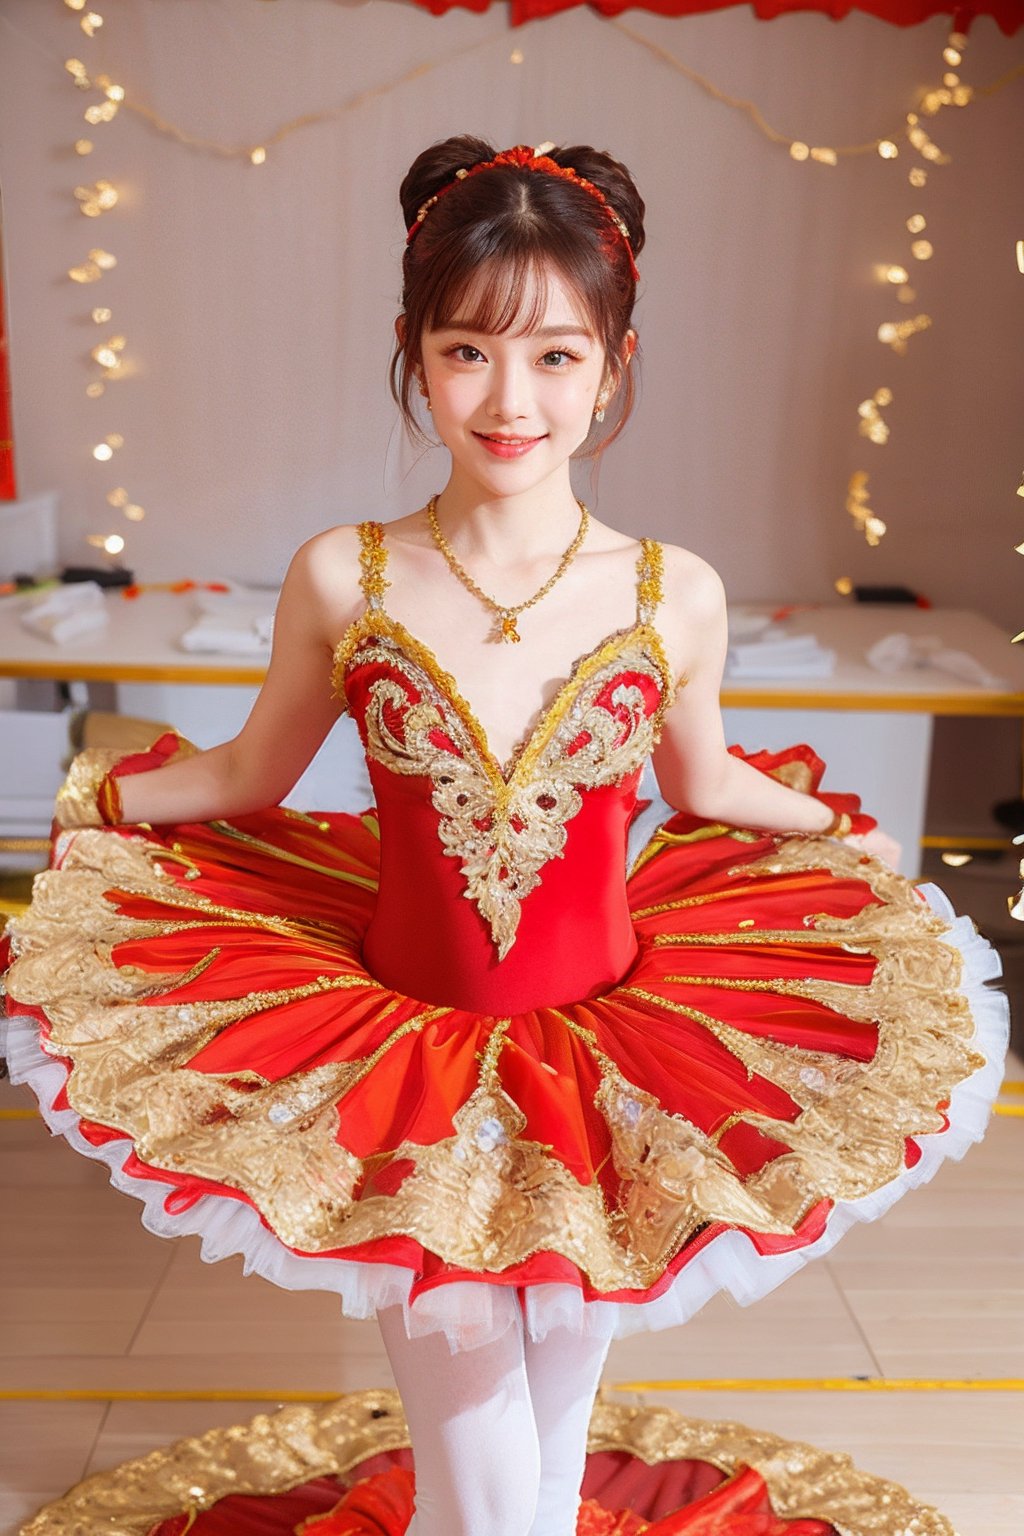 HDR,UHD,8K,best quality,masterpiece,Highly detailed,Studio lighting,ultra-fine painting,sharp focus,physically-based rendering,extreme detail description,Professional,masterpiece, best quality,delicate, beautiful,(1girl),(red Ballet_tutu:1.5),(jewelry:1.5),lace,(looking_at_viewer:1.2), realistic,(blunt bangs:1.2),(hair bun),(standing:1),(hair ornament:1.2), (jewelry necklace:1),dance classroom background,(Half-length photo:1),(smile:1),(white lace stockings:1),